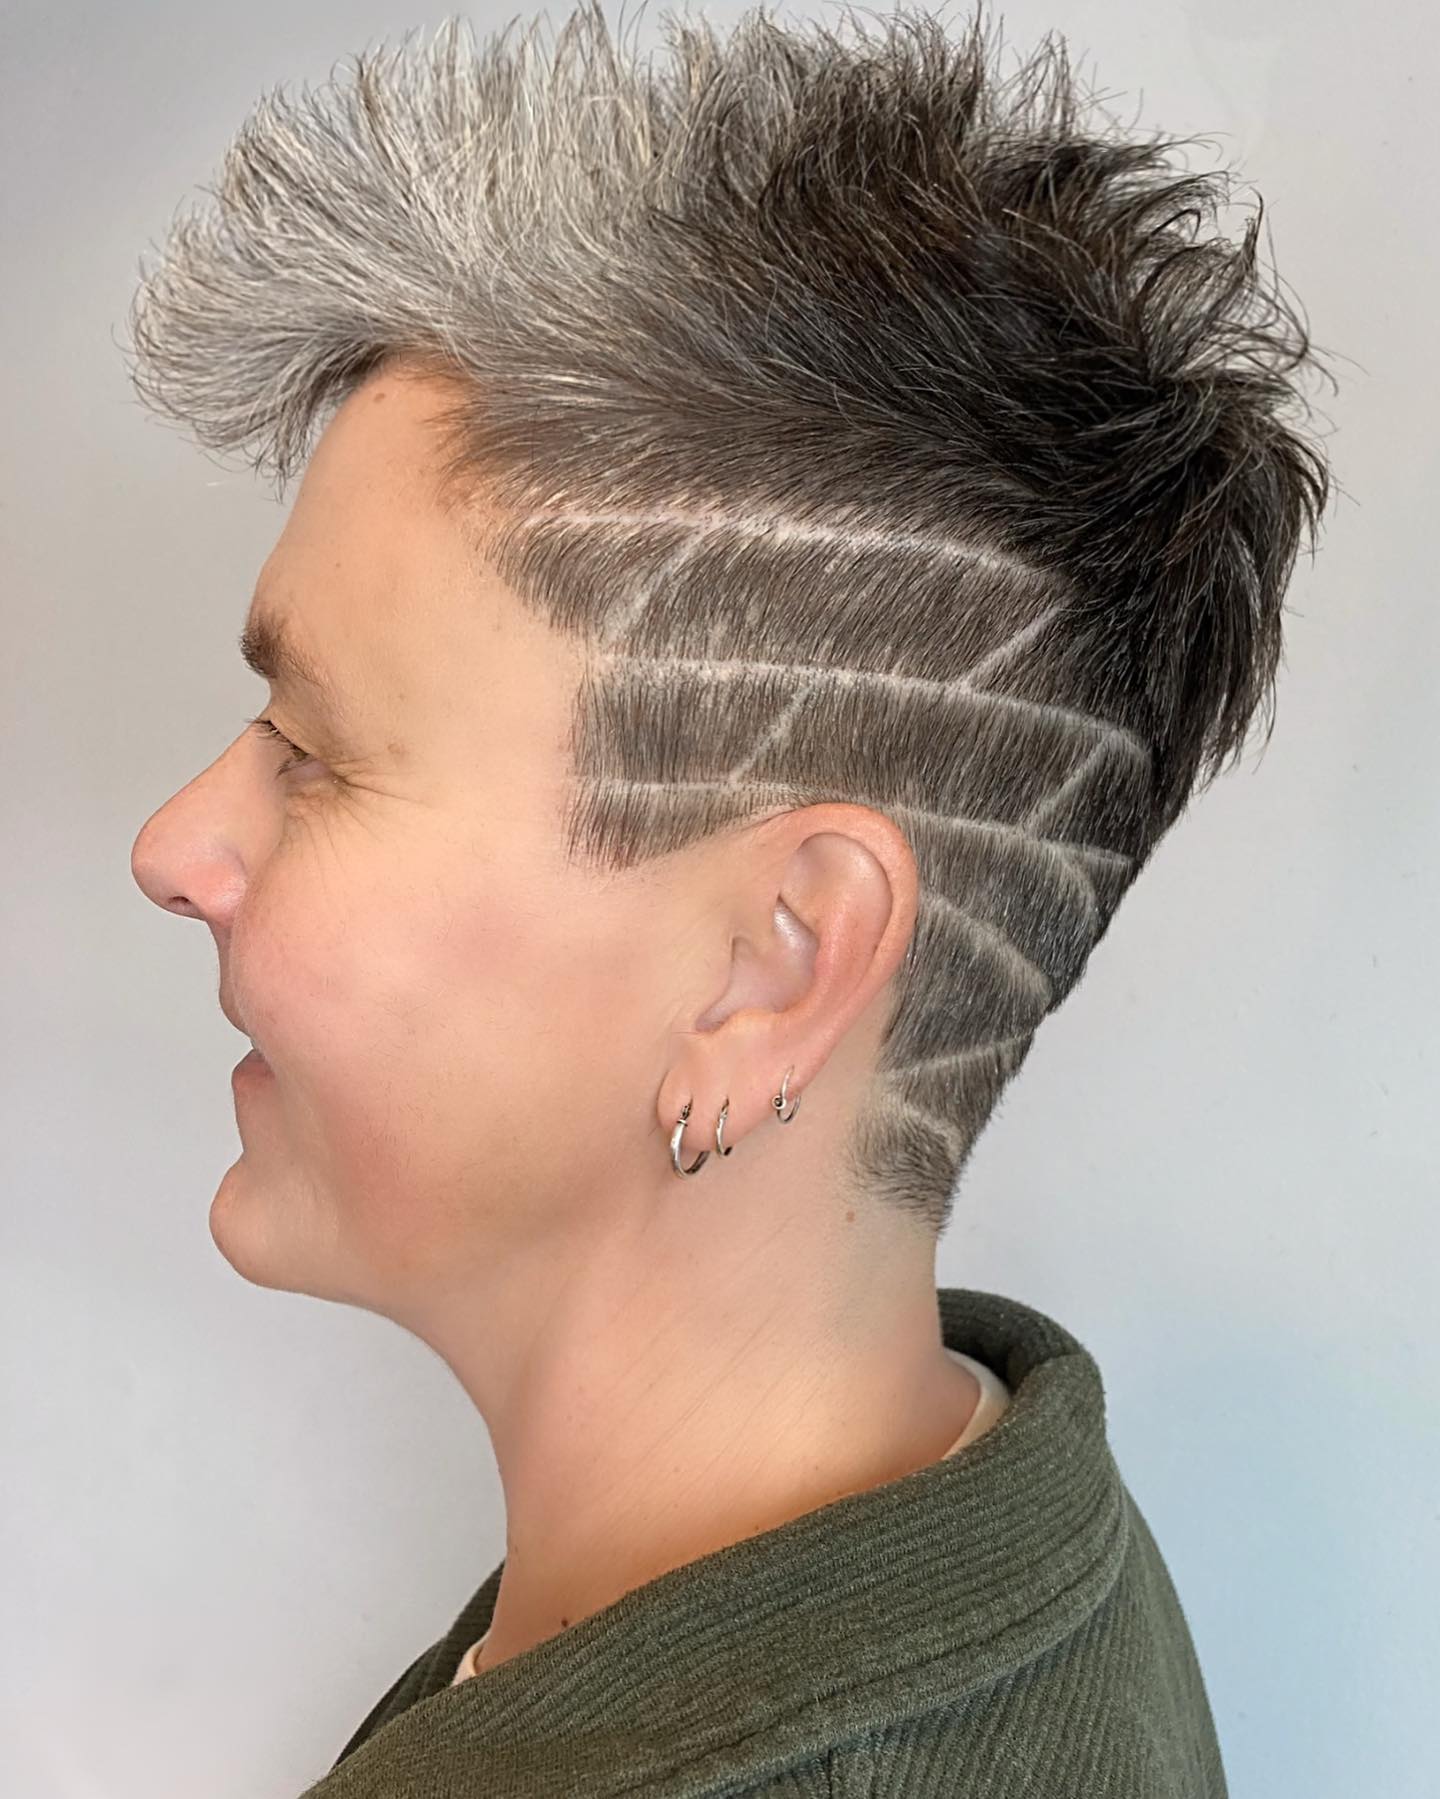 Buzz Cut on Grey Hair with a Pattern on the Side